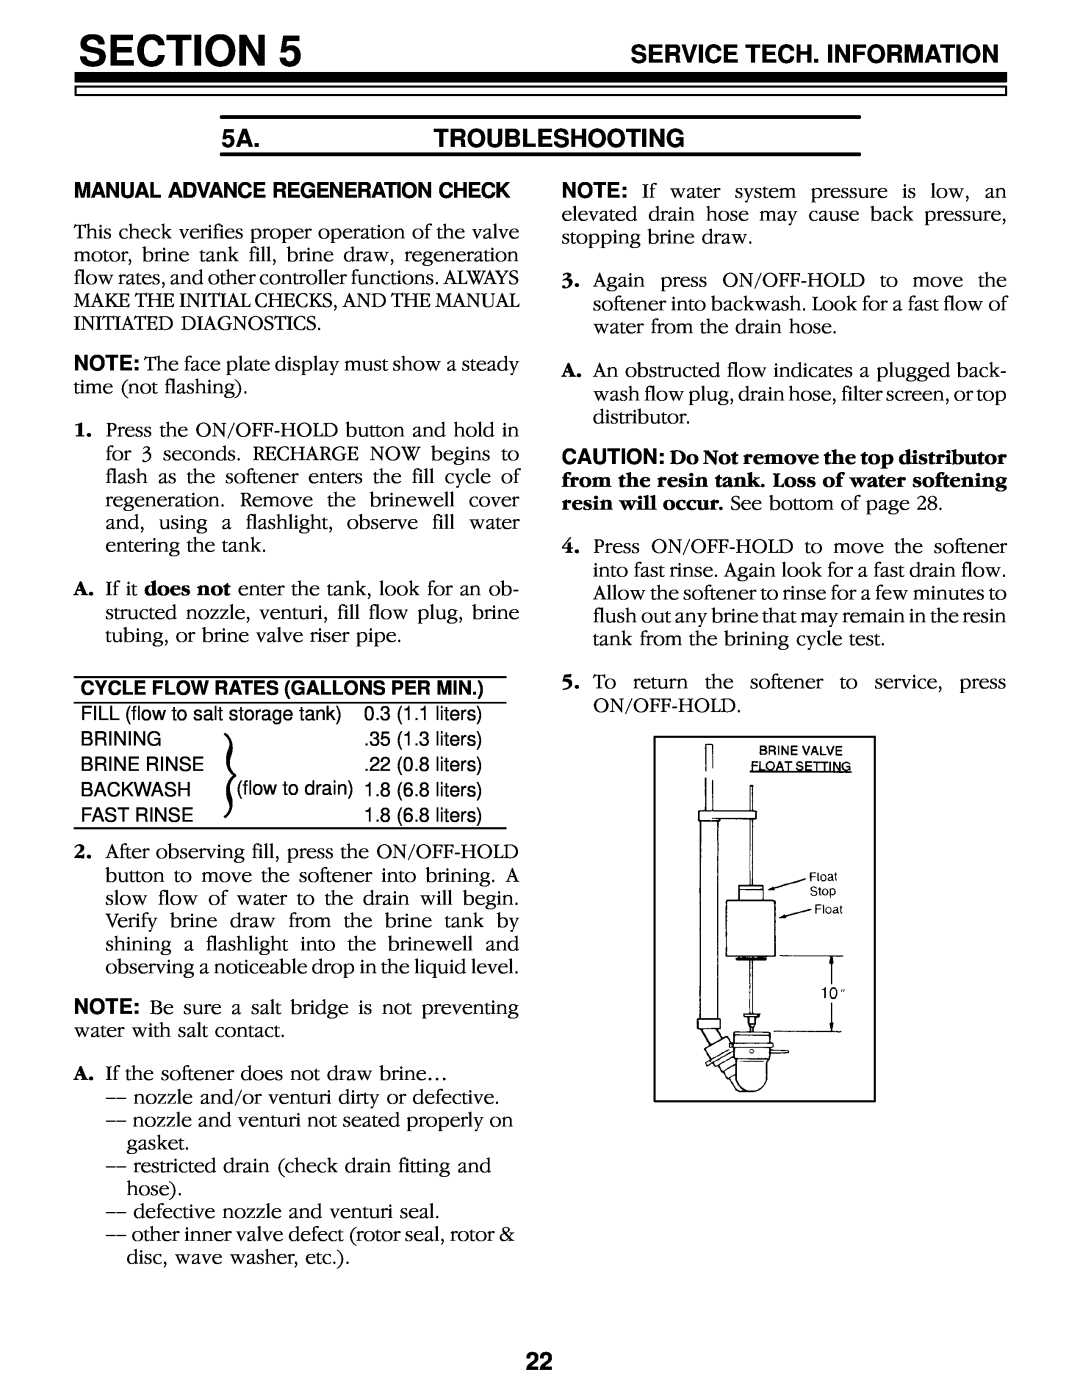 Kenmore 625.348460 owner manual Section, Service Tech. Information, 5A.TROUBLESHOOTING, Manual Advance Regeneration Check 